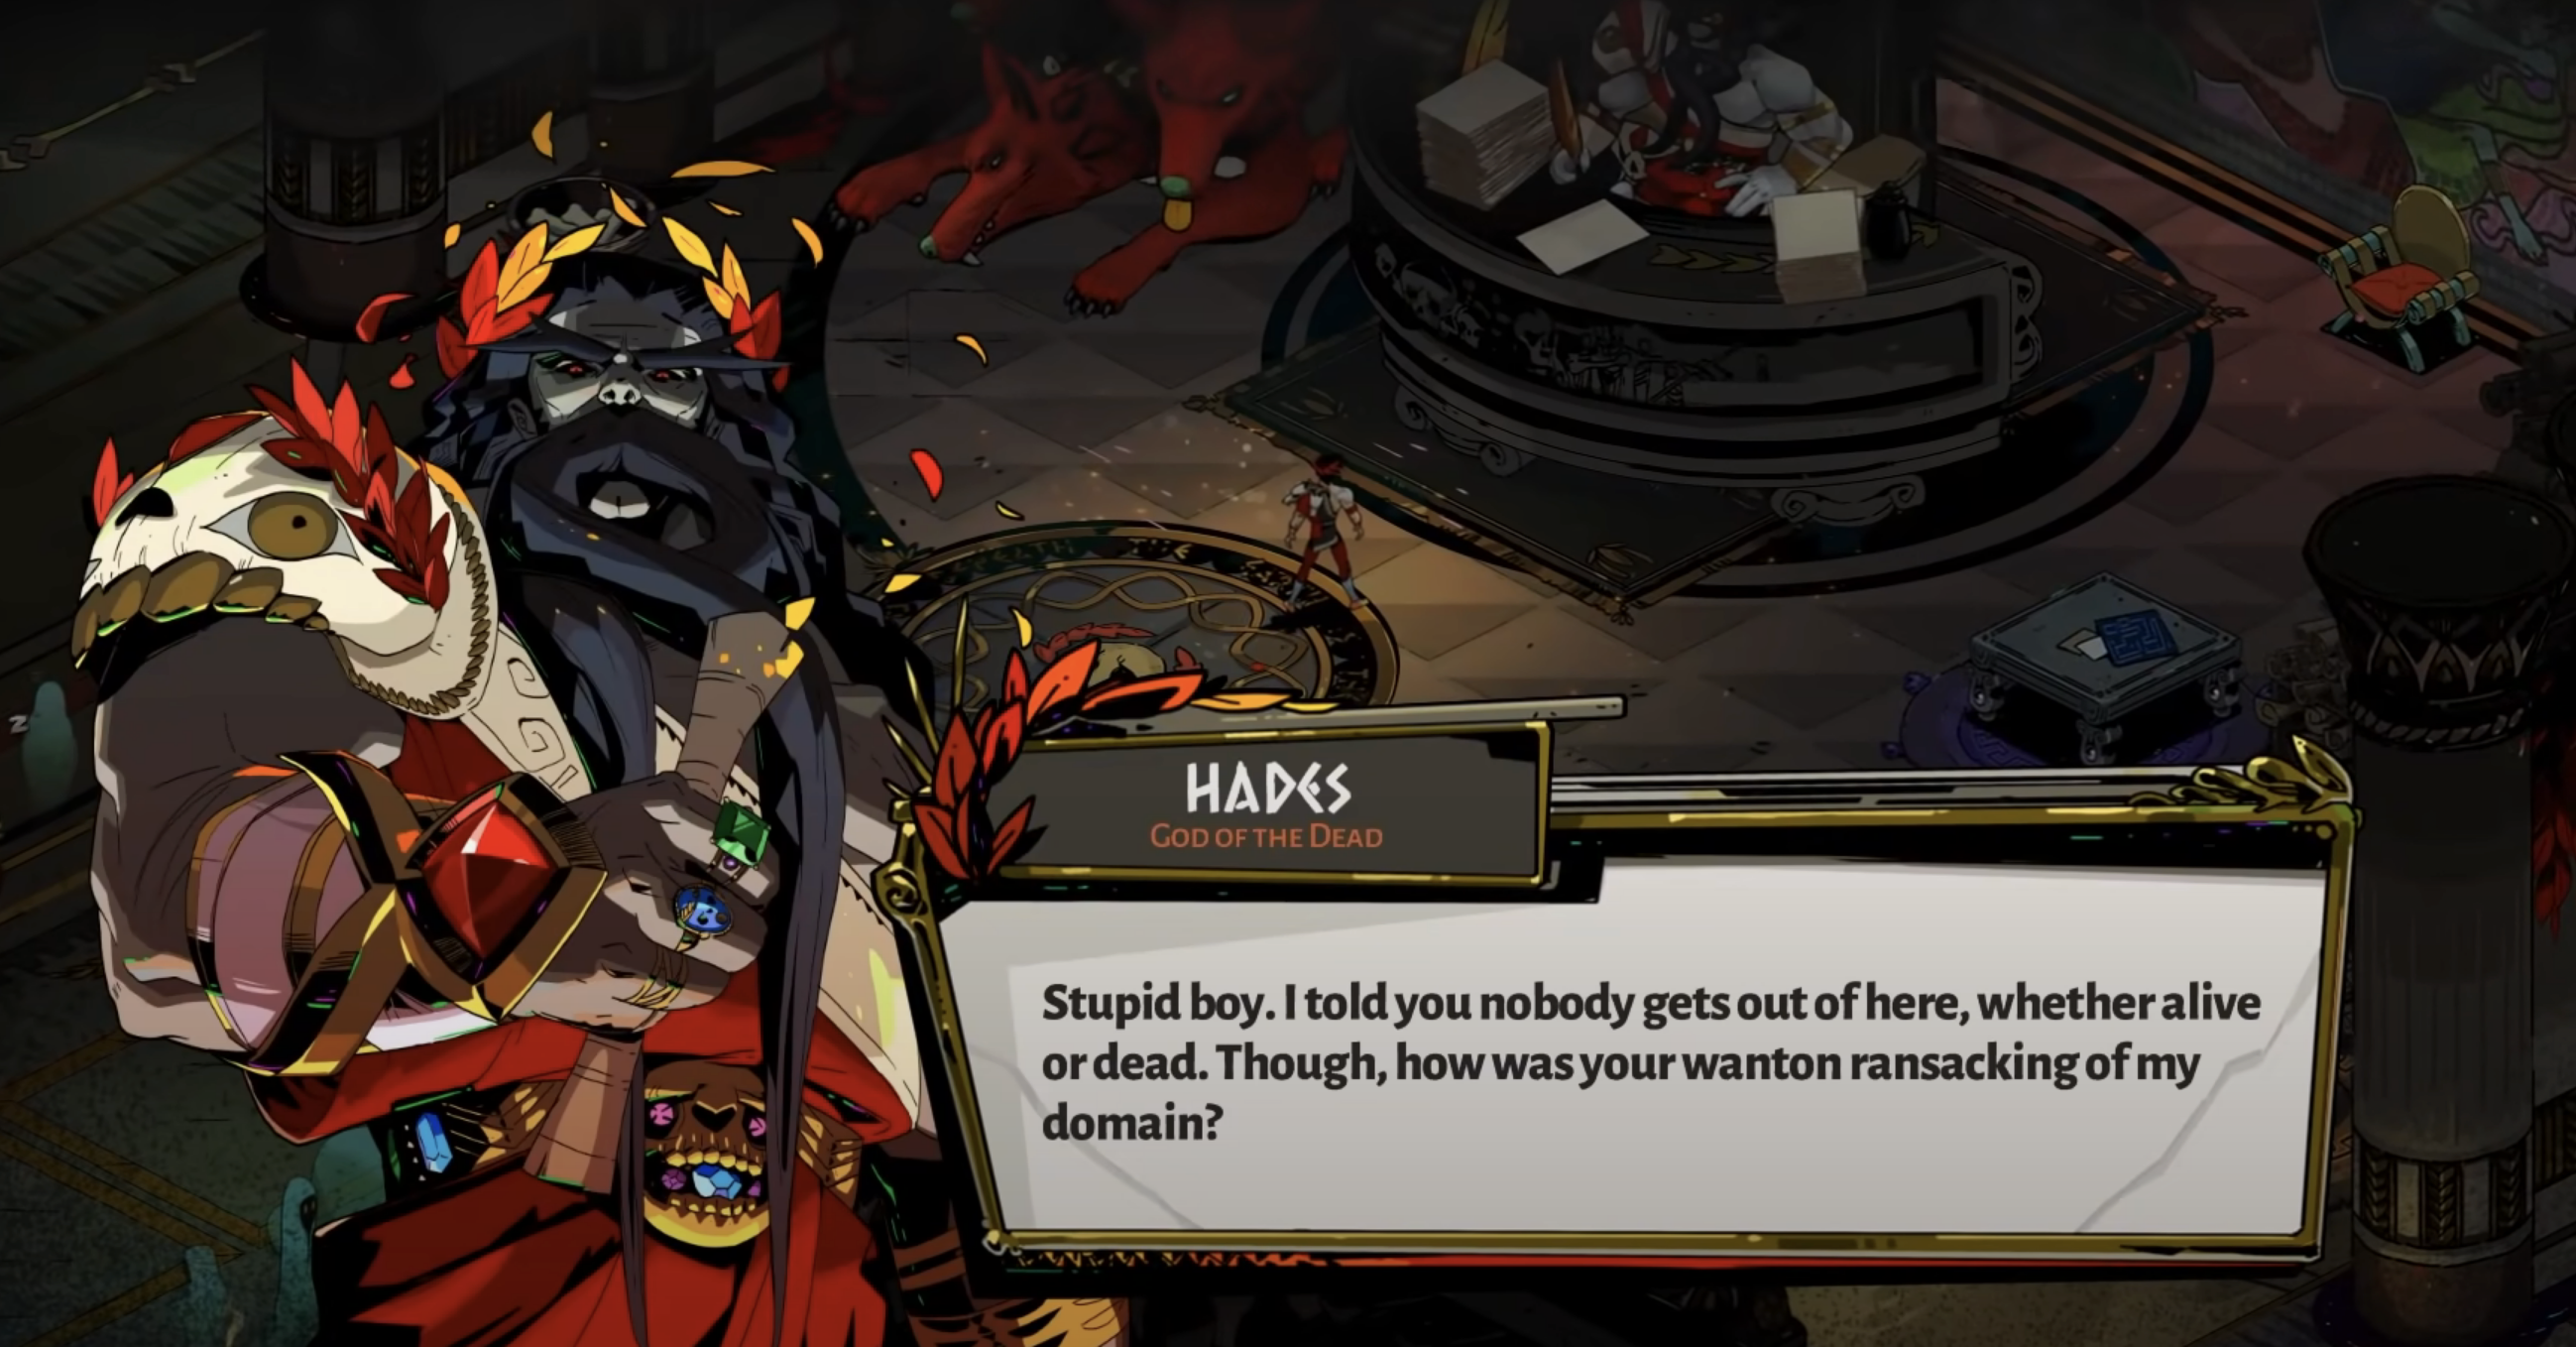 Hades next to a text box where he&#x27;s chastising Zagreus for attempting to escape his domain